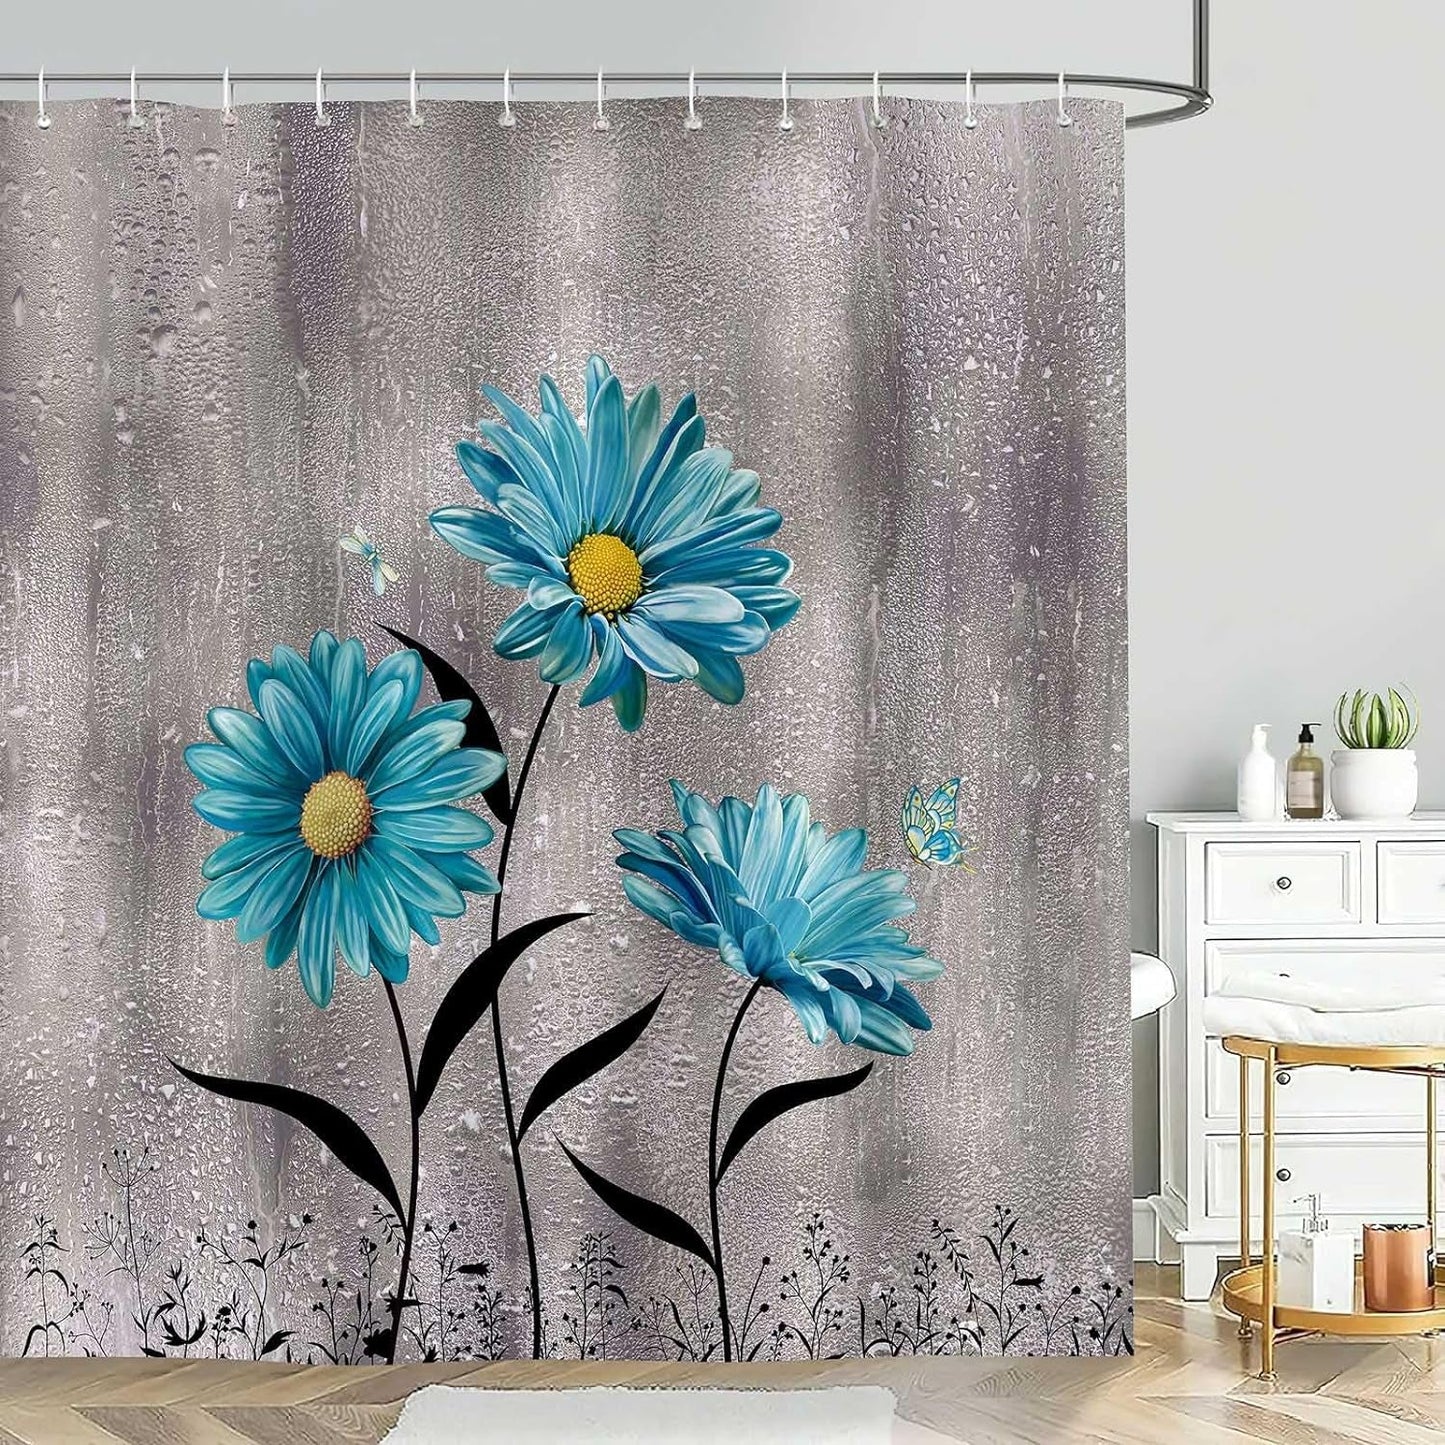 Grey Shower Curtain for Bathroom, Rustic Country Blue Floral Shower Curtains,Gray Heavy Duty Textured Fabric Bathroom Shower Curtains,72X72 Inch